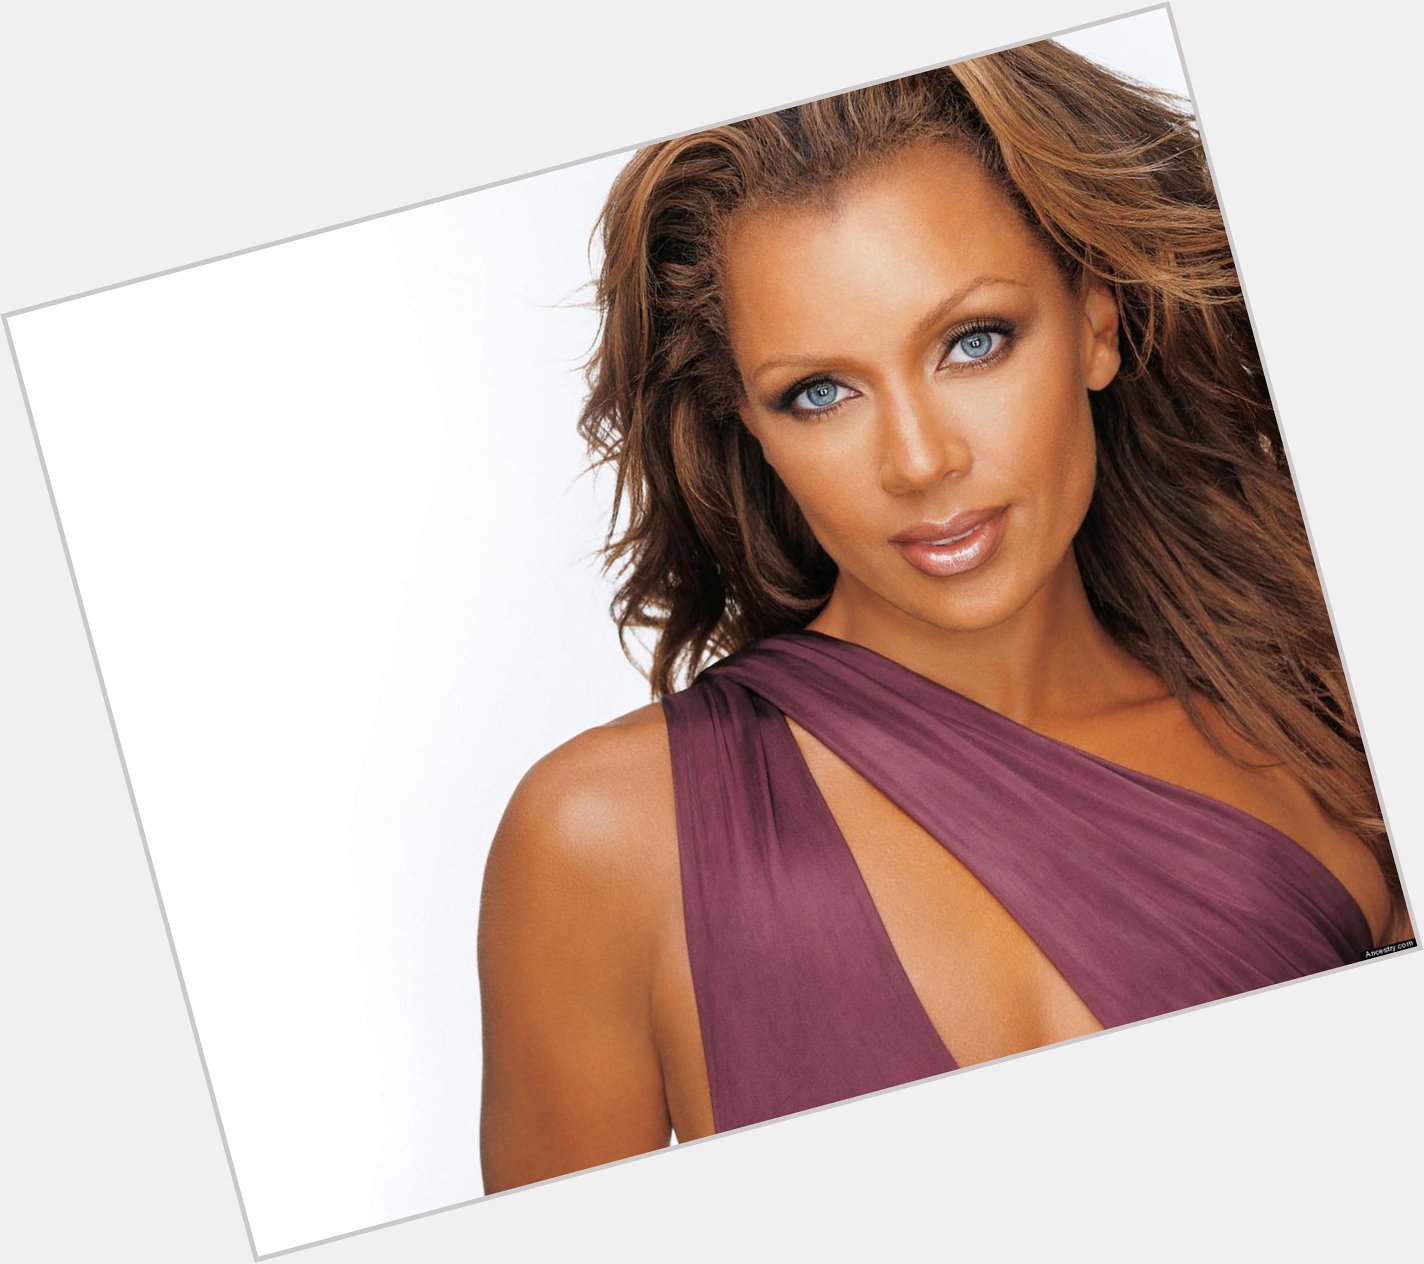 Happy Birthday, Vanessa Williams! She\s the first African American to win Miss America in 1984 & 52 today! 